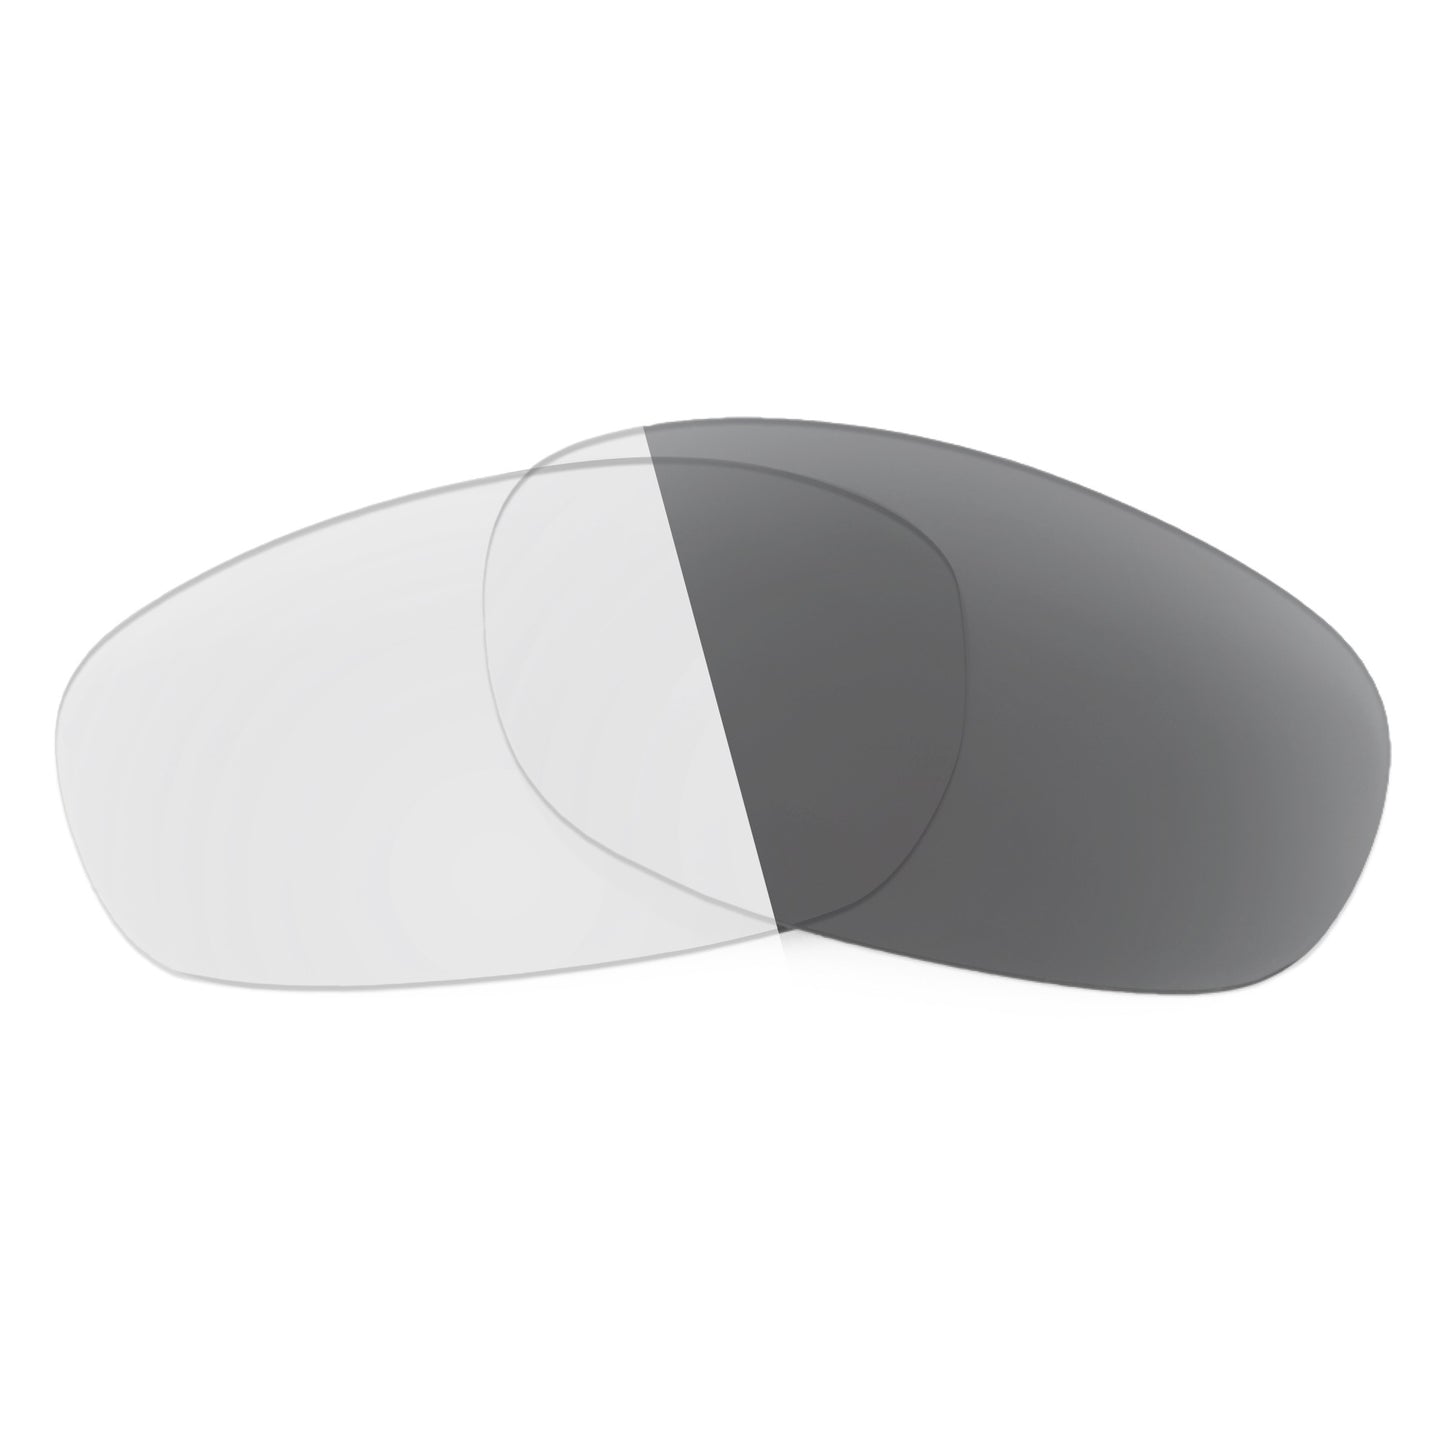 Revant replacement lenses for Ray-Ban RB4213 61mm Non-Polarized Adapt Gray Photochromic